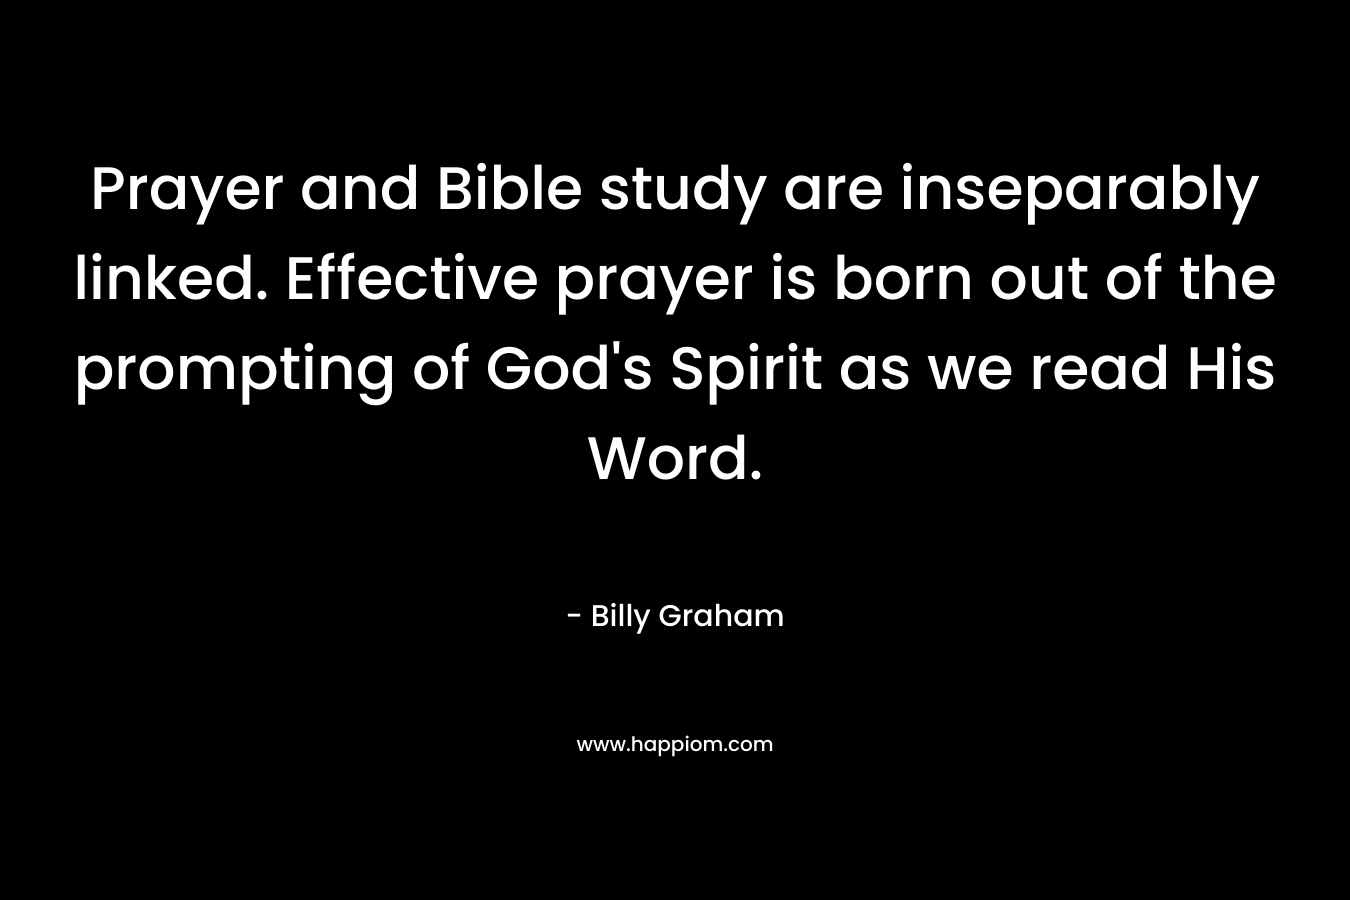 Prayer and Bible study are inseparably linked. Effective prayer is born out of the prompting of God's Spirit as we read His Word.